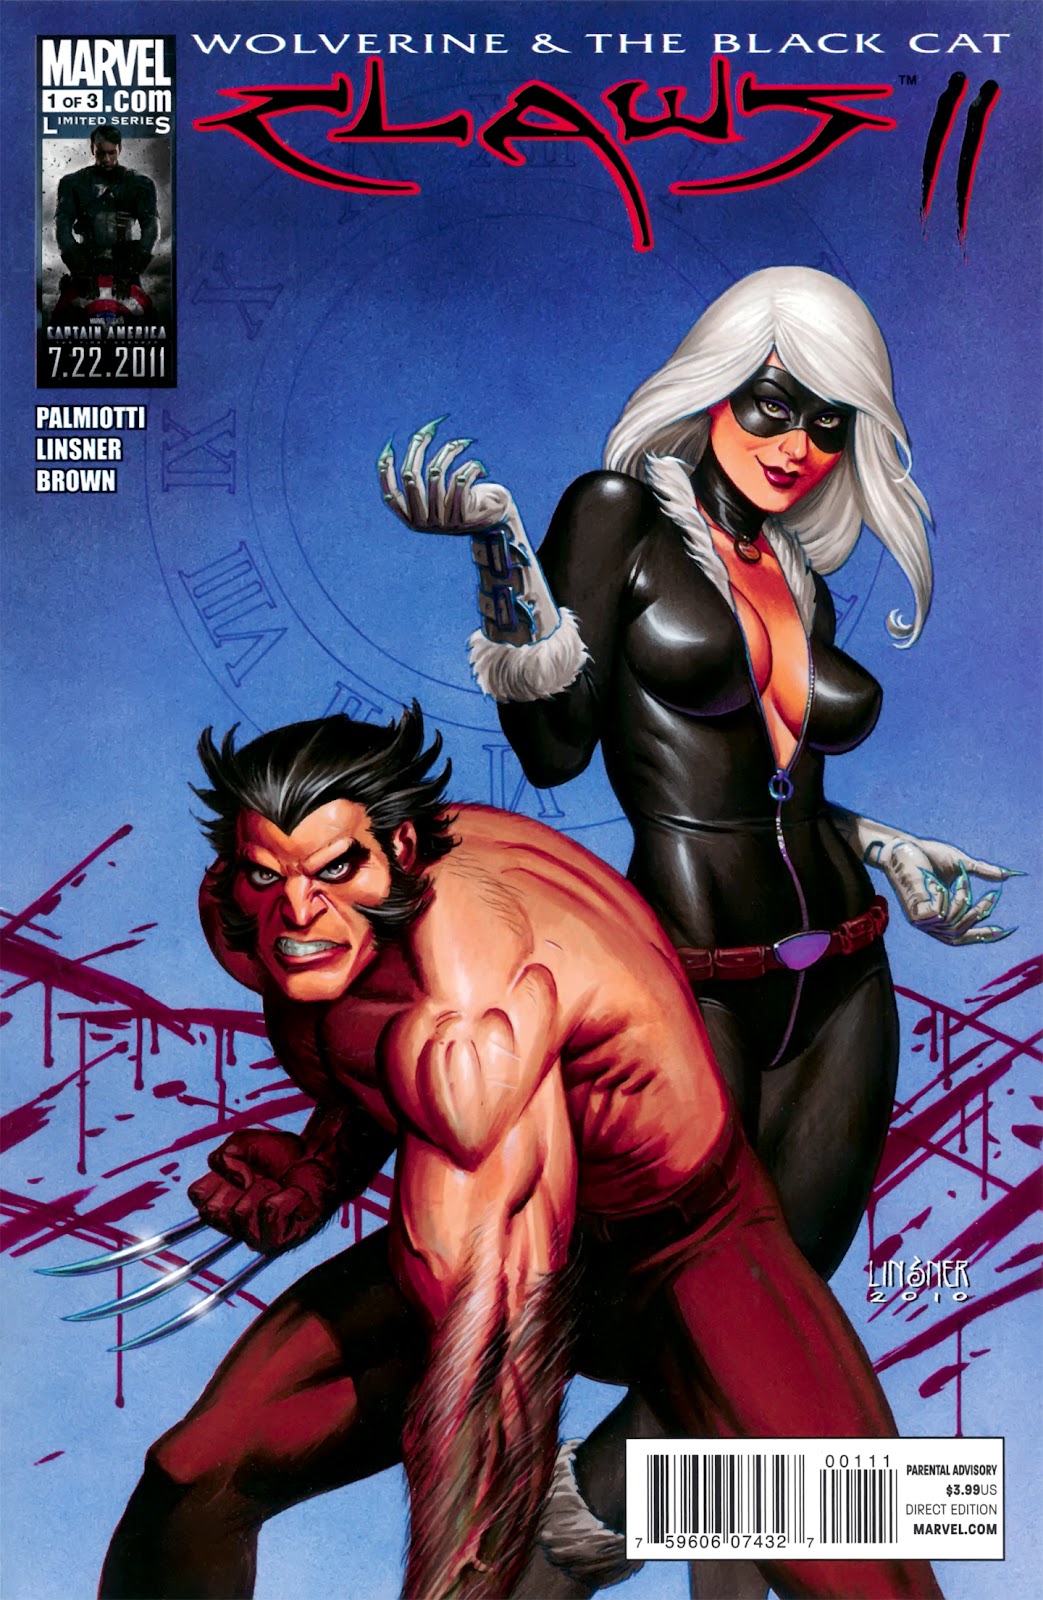 Wolverine & Black Cat: Claws 2 Issue #1 #1 - English 1